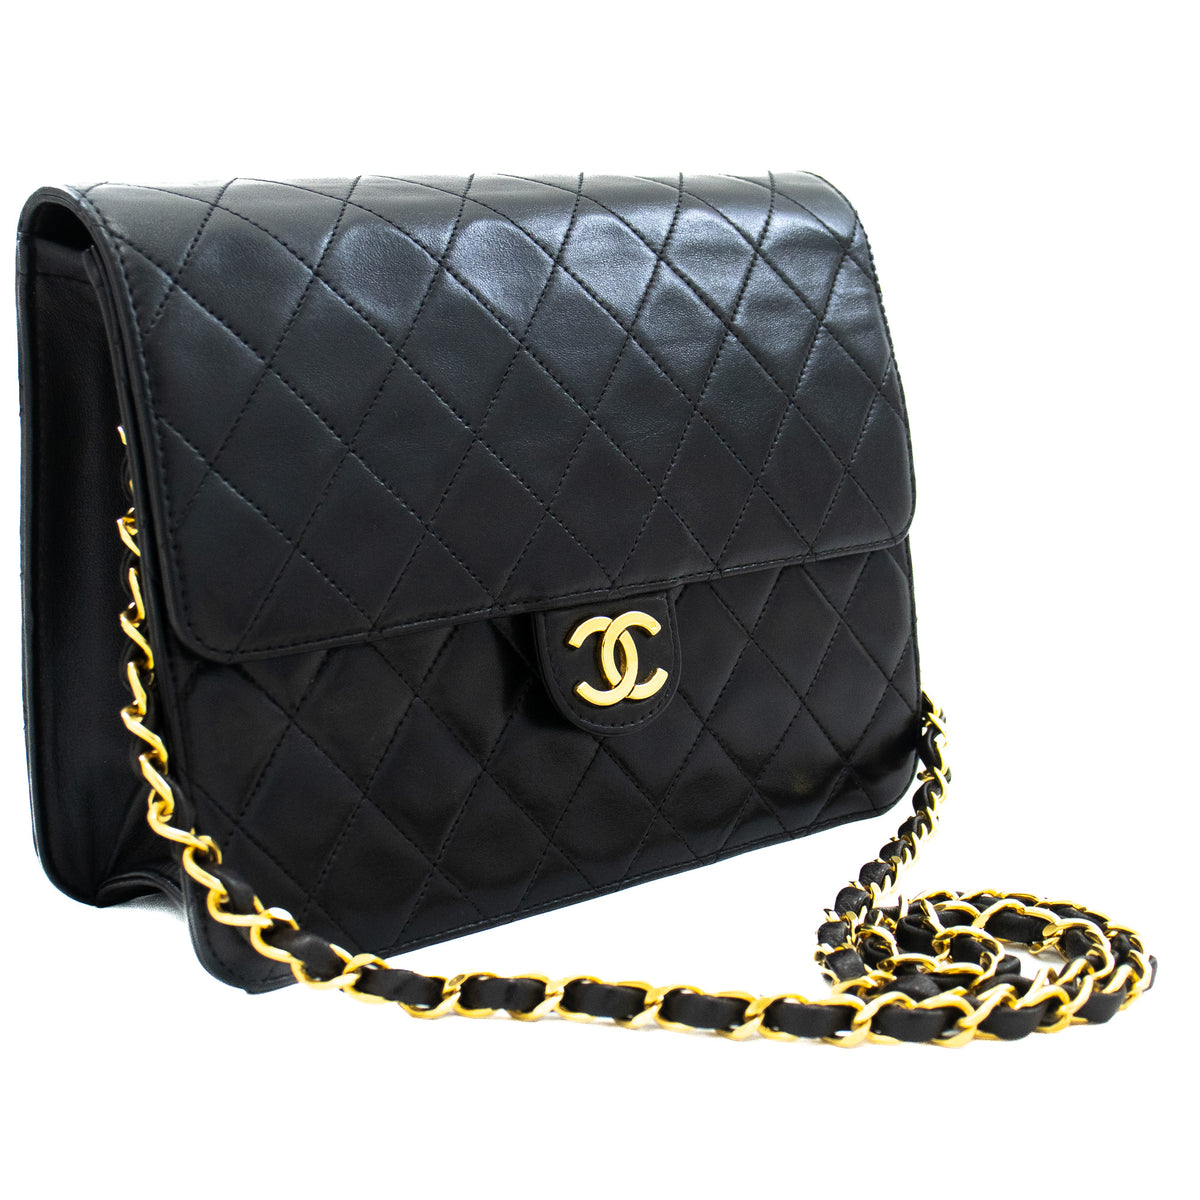 j44 CHANEL Authentic Navy Caviar Double Flap Chain Shoulder Bag Quilted  Leather